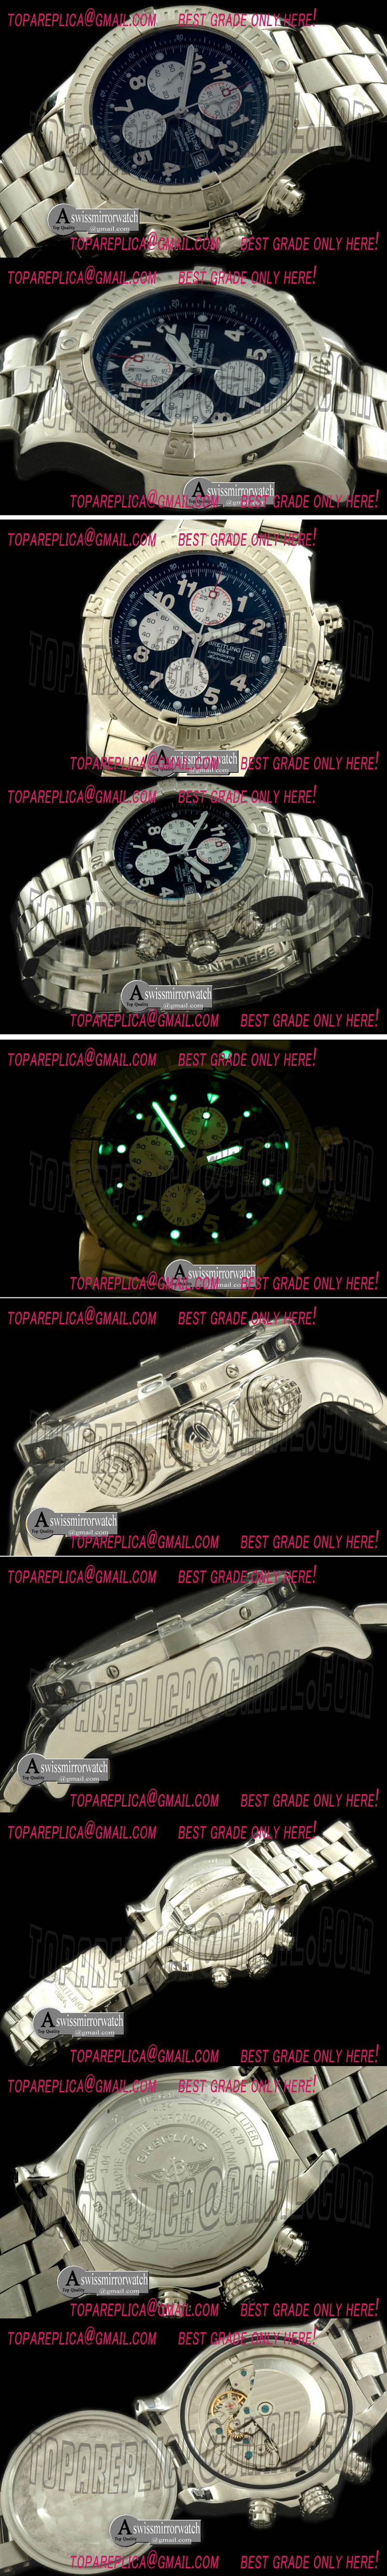 Replica Breitling Watches